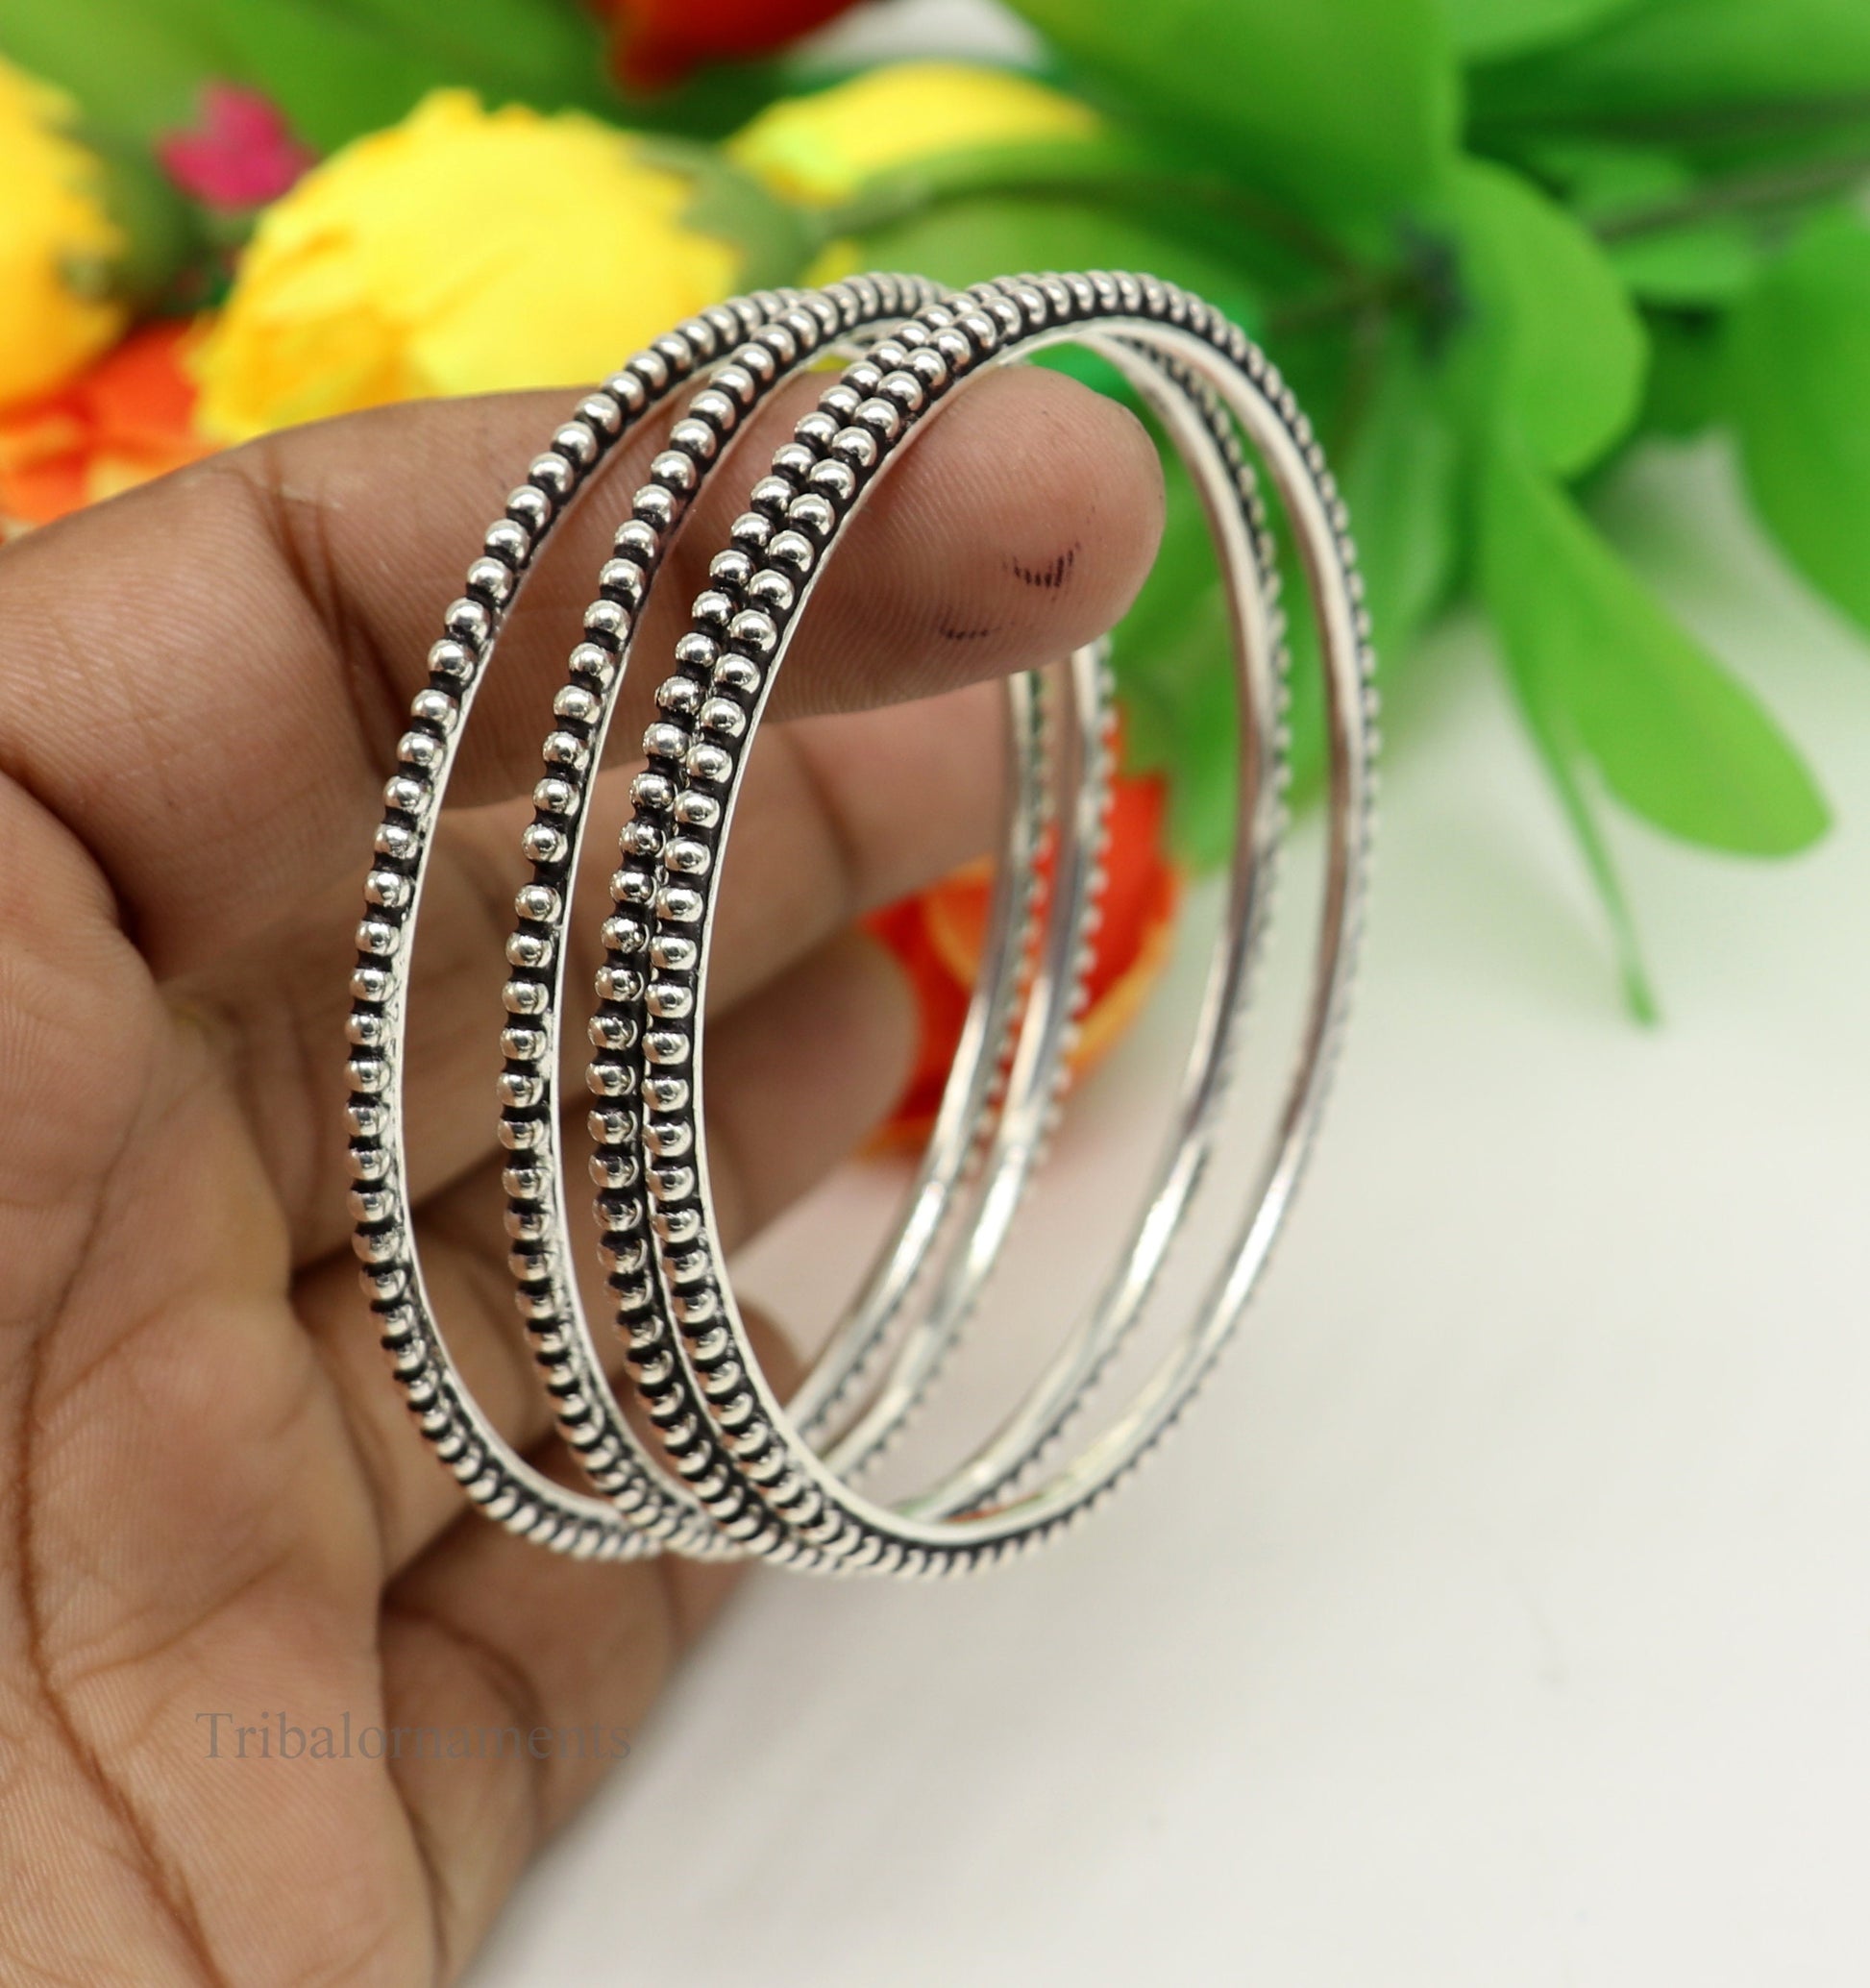 925 sterling customized waved silver balls work stylish designer bangle bracelet pure silver gifting jewelry, brides made bangles  nba177 - TRIBAL ORNAMENTS